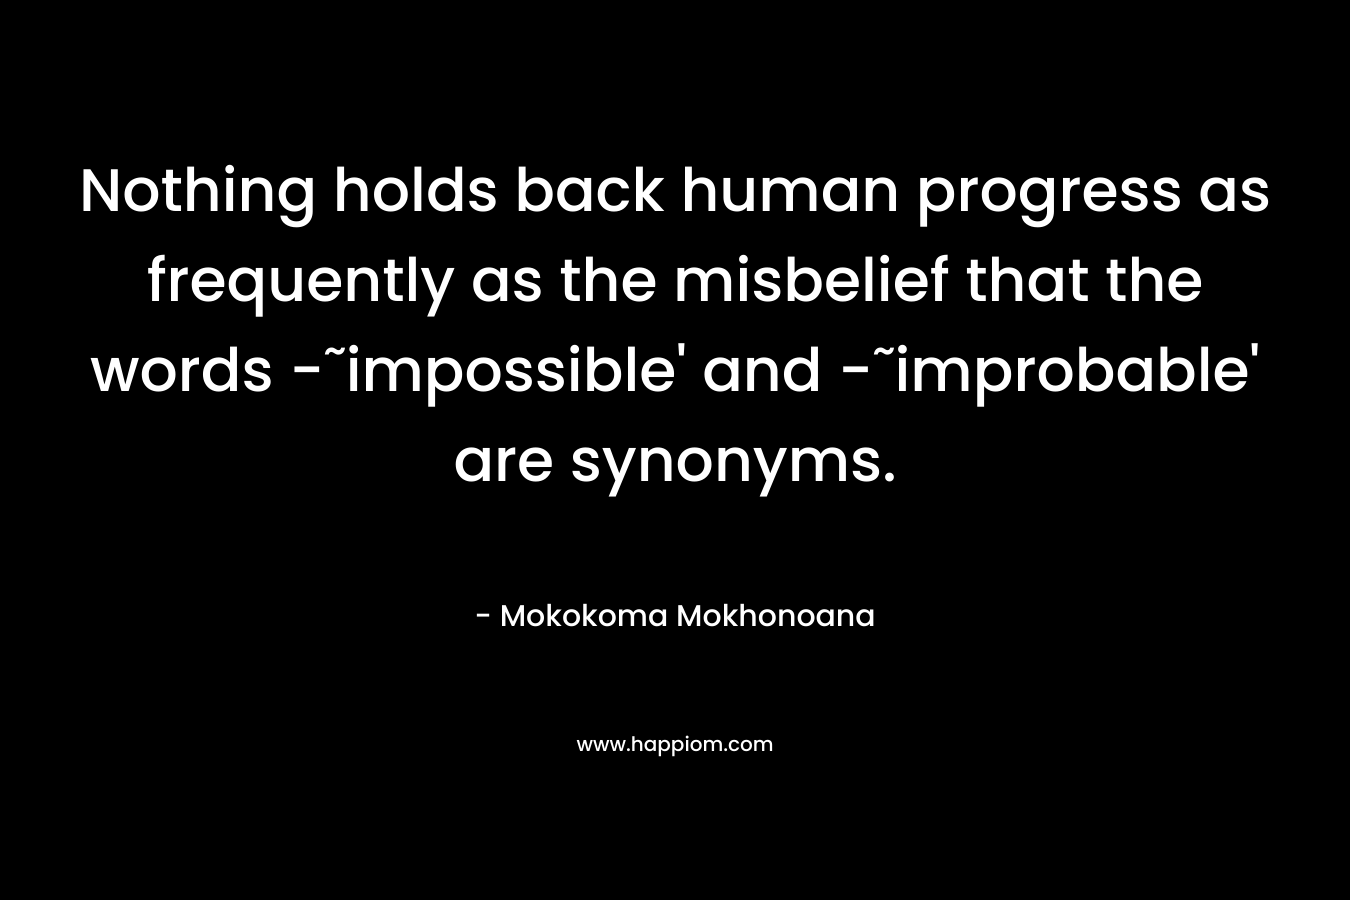 Nothing holds back human progress as frequently as the misbelief that the words -˜impossible' and -˜improbable' are synonyms.